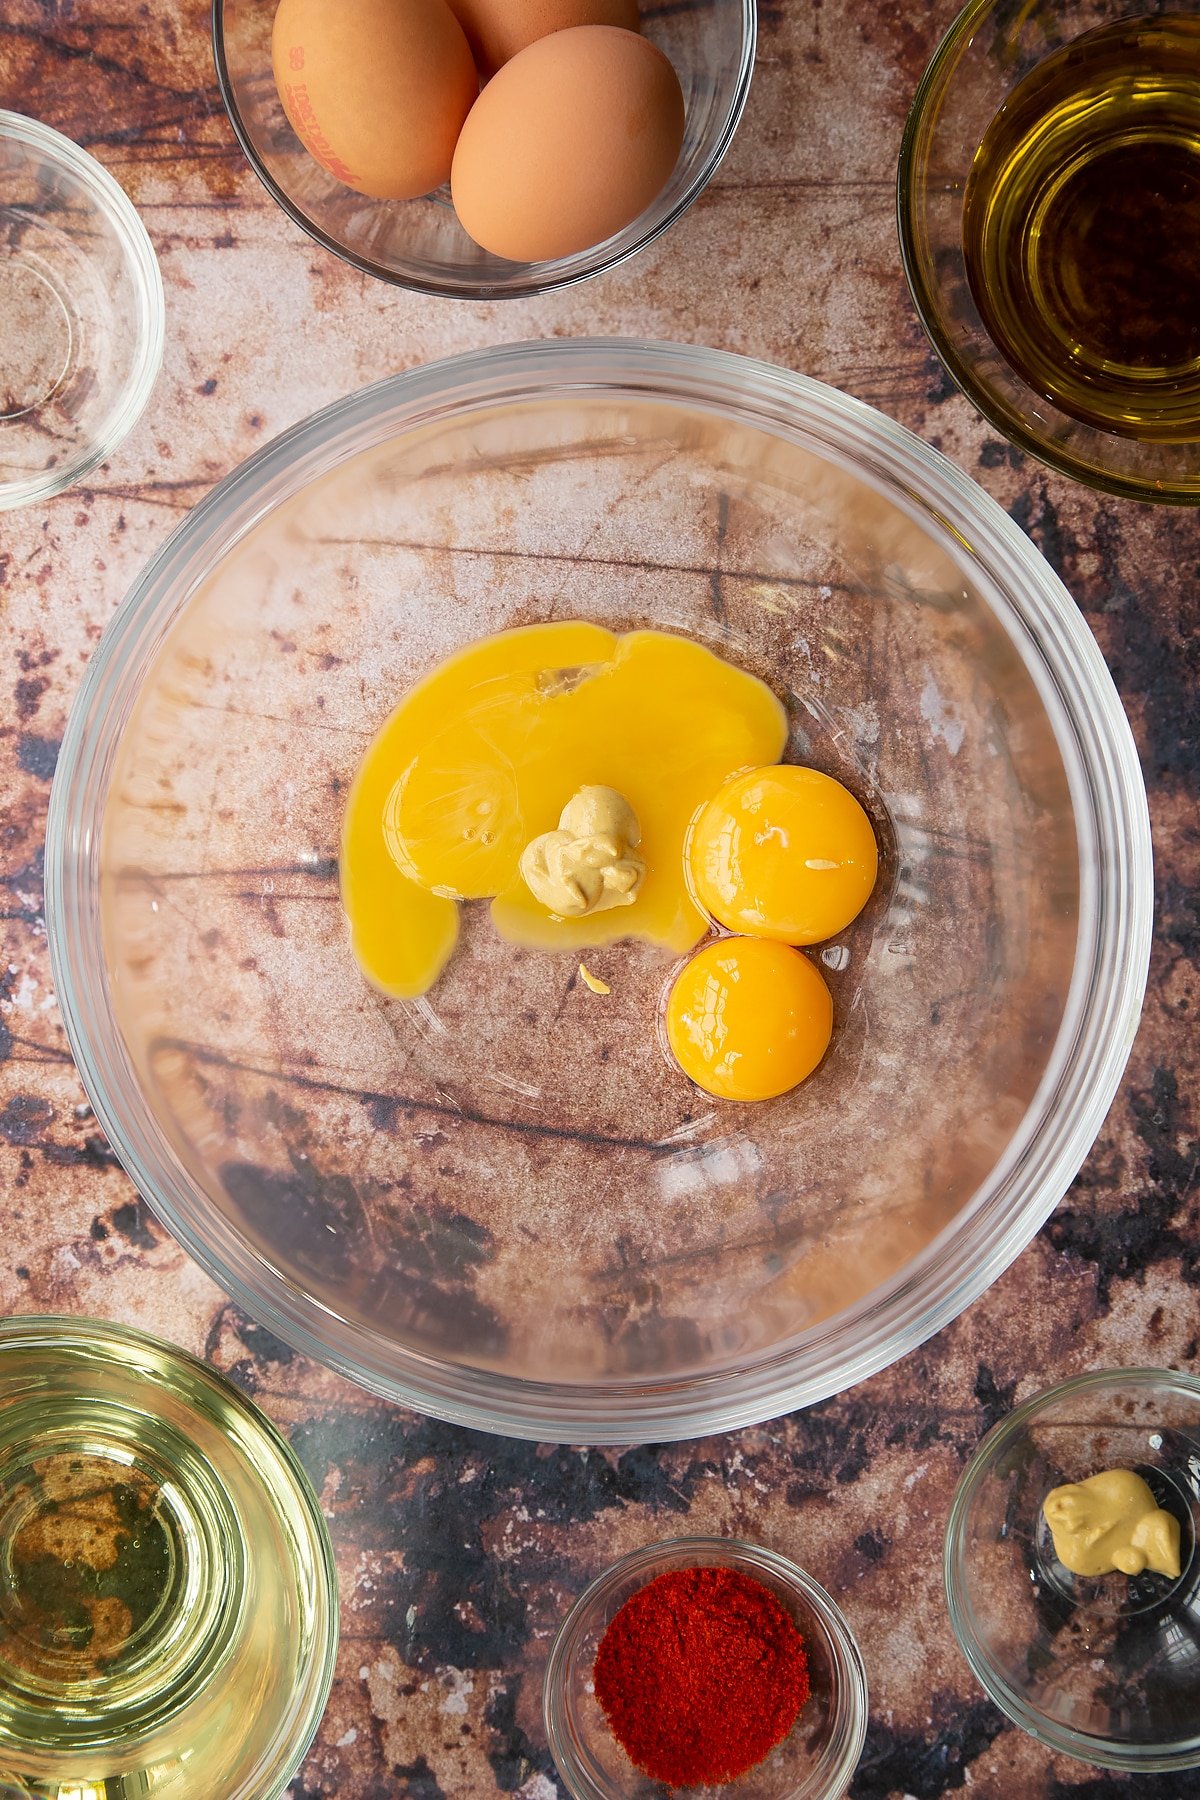 Vinegar, egg yolks and mustard in a glass mixing bowl. Ingredients to make paprika mayo surround the bowl.